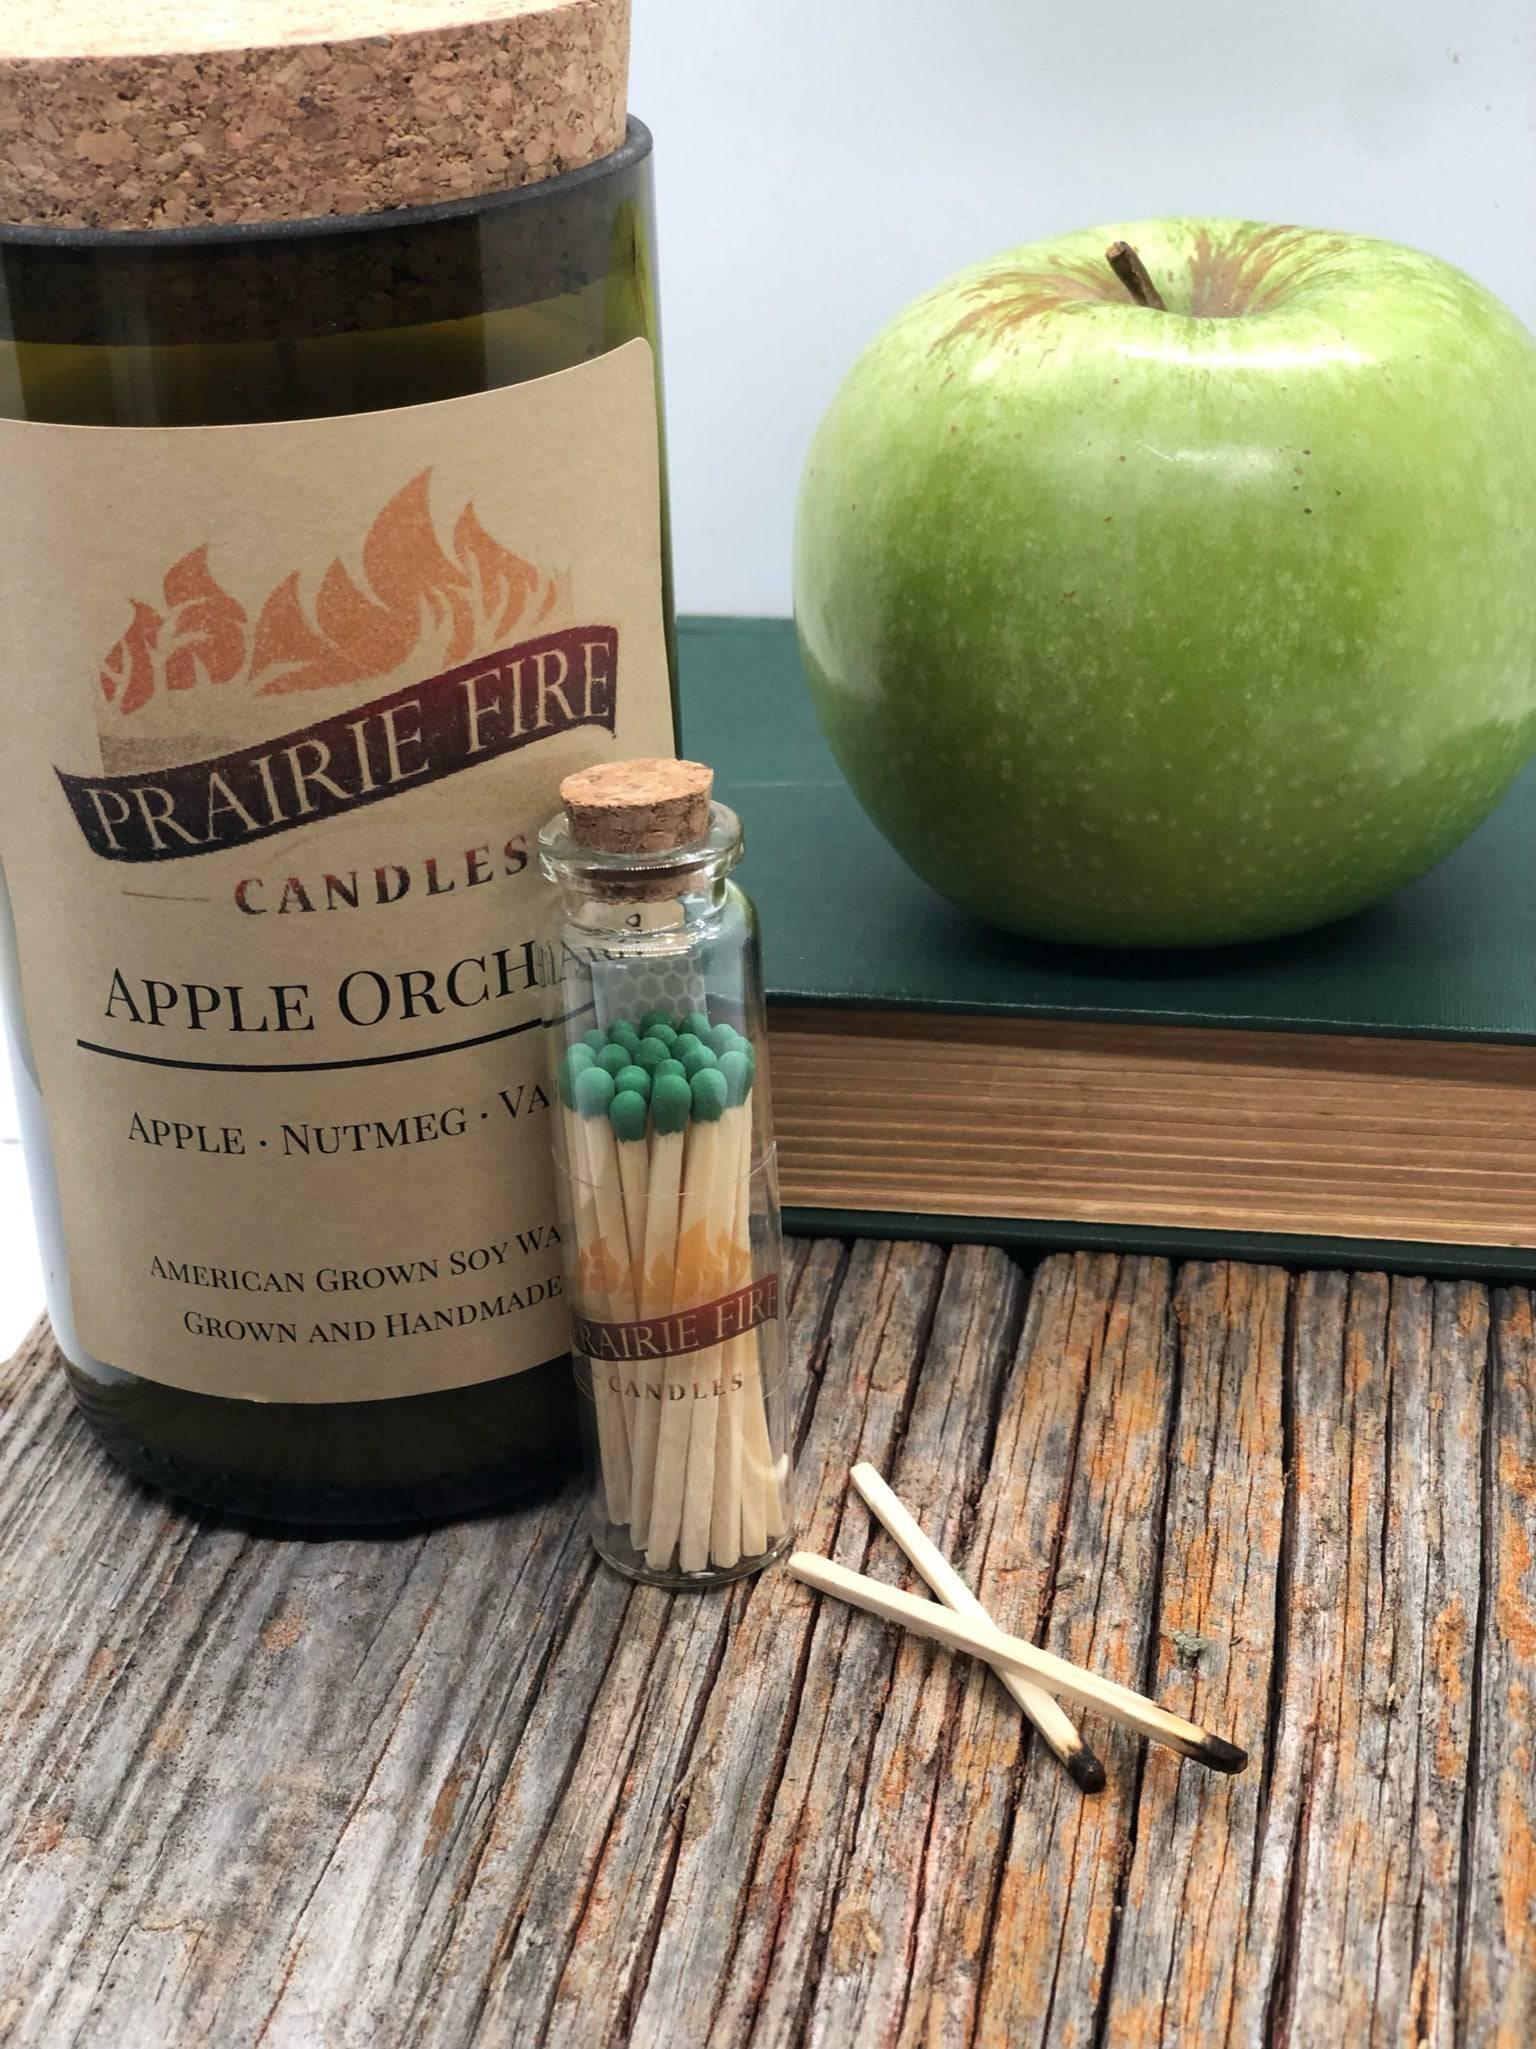 Apple Orchard Soy Wax Candle | Repurposed Wine Bottle Candle Natural Cork | Handmade in USA Candle | Eco-Friendly Candle | Non-Toxic Soy Candle - Prairie Fire Candles